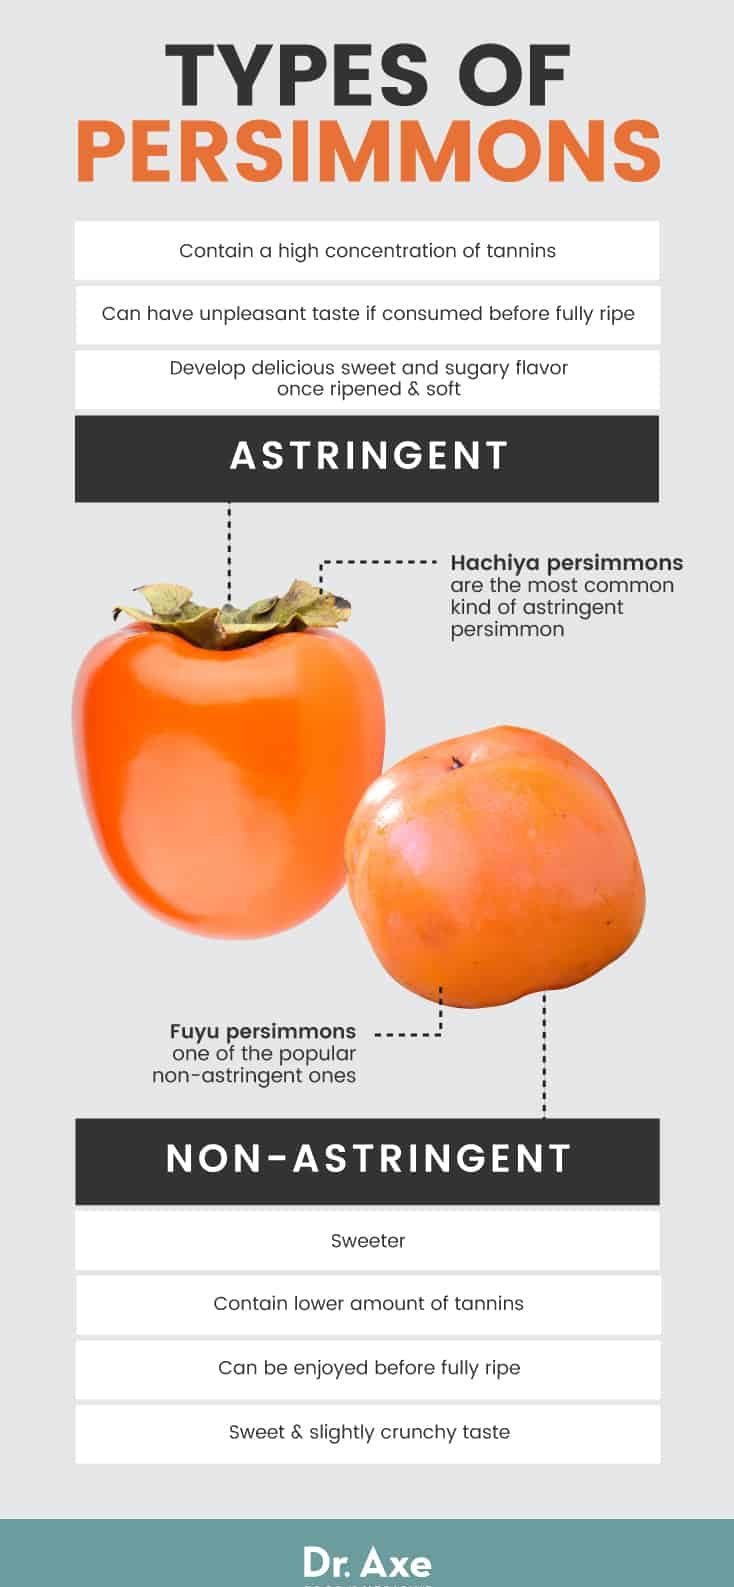 Types of persimmons - Dr. Axe